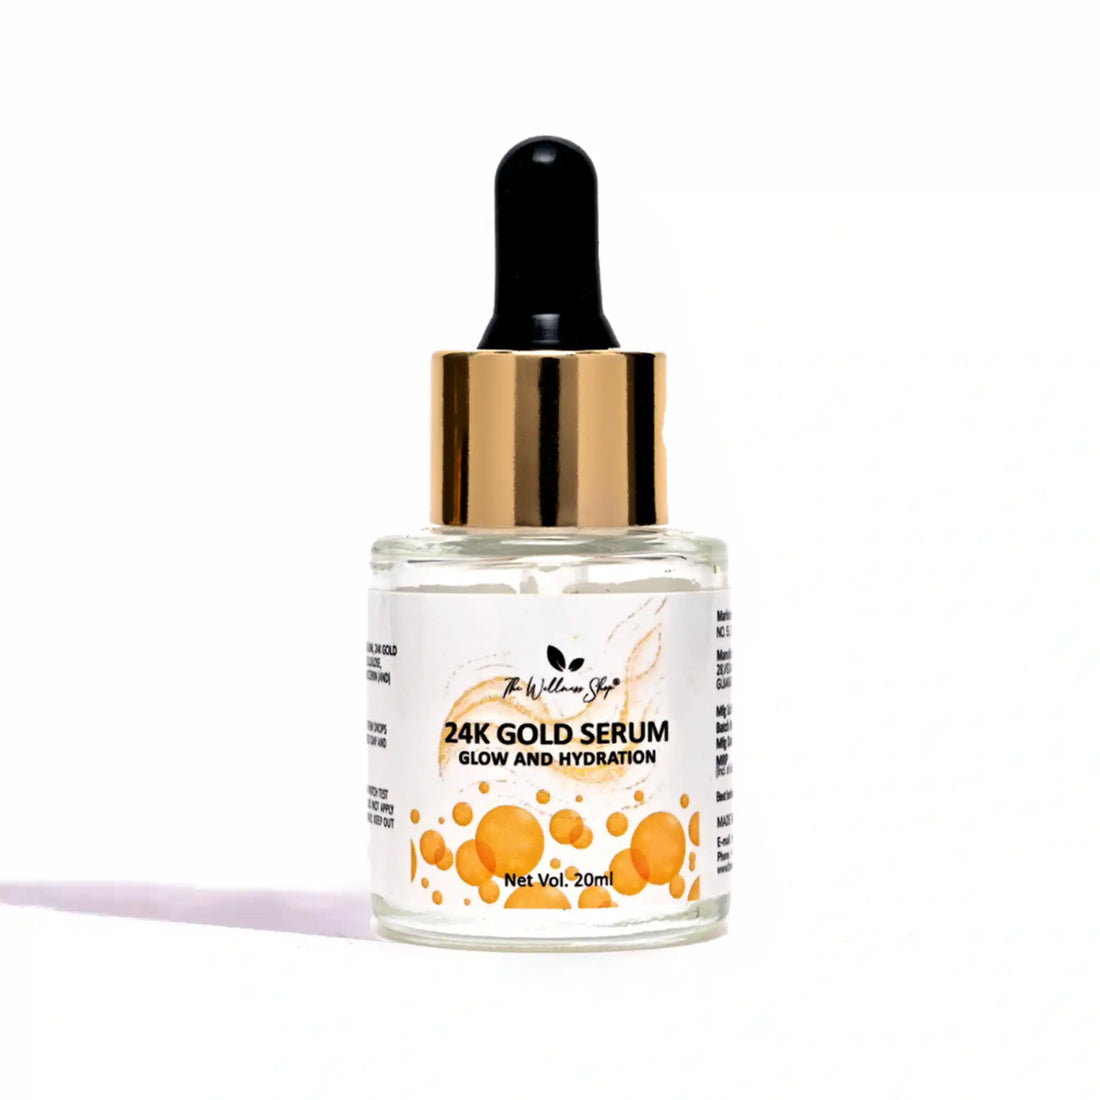 24K GOLD SERUM FOR GLOW AND HYDRATION - WATER BASED